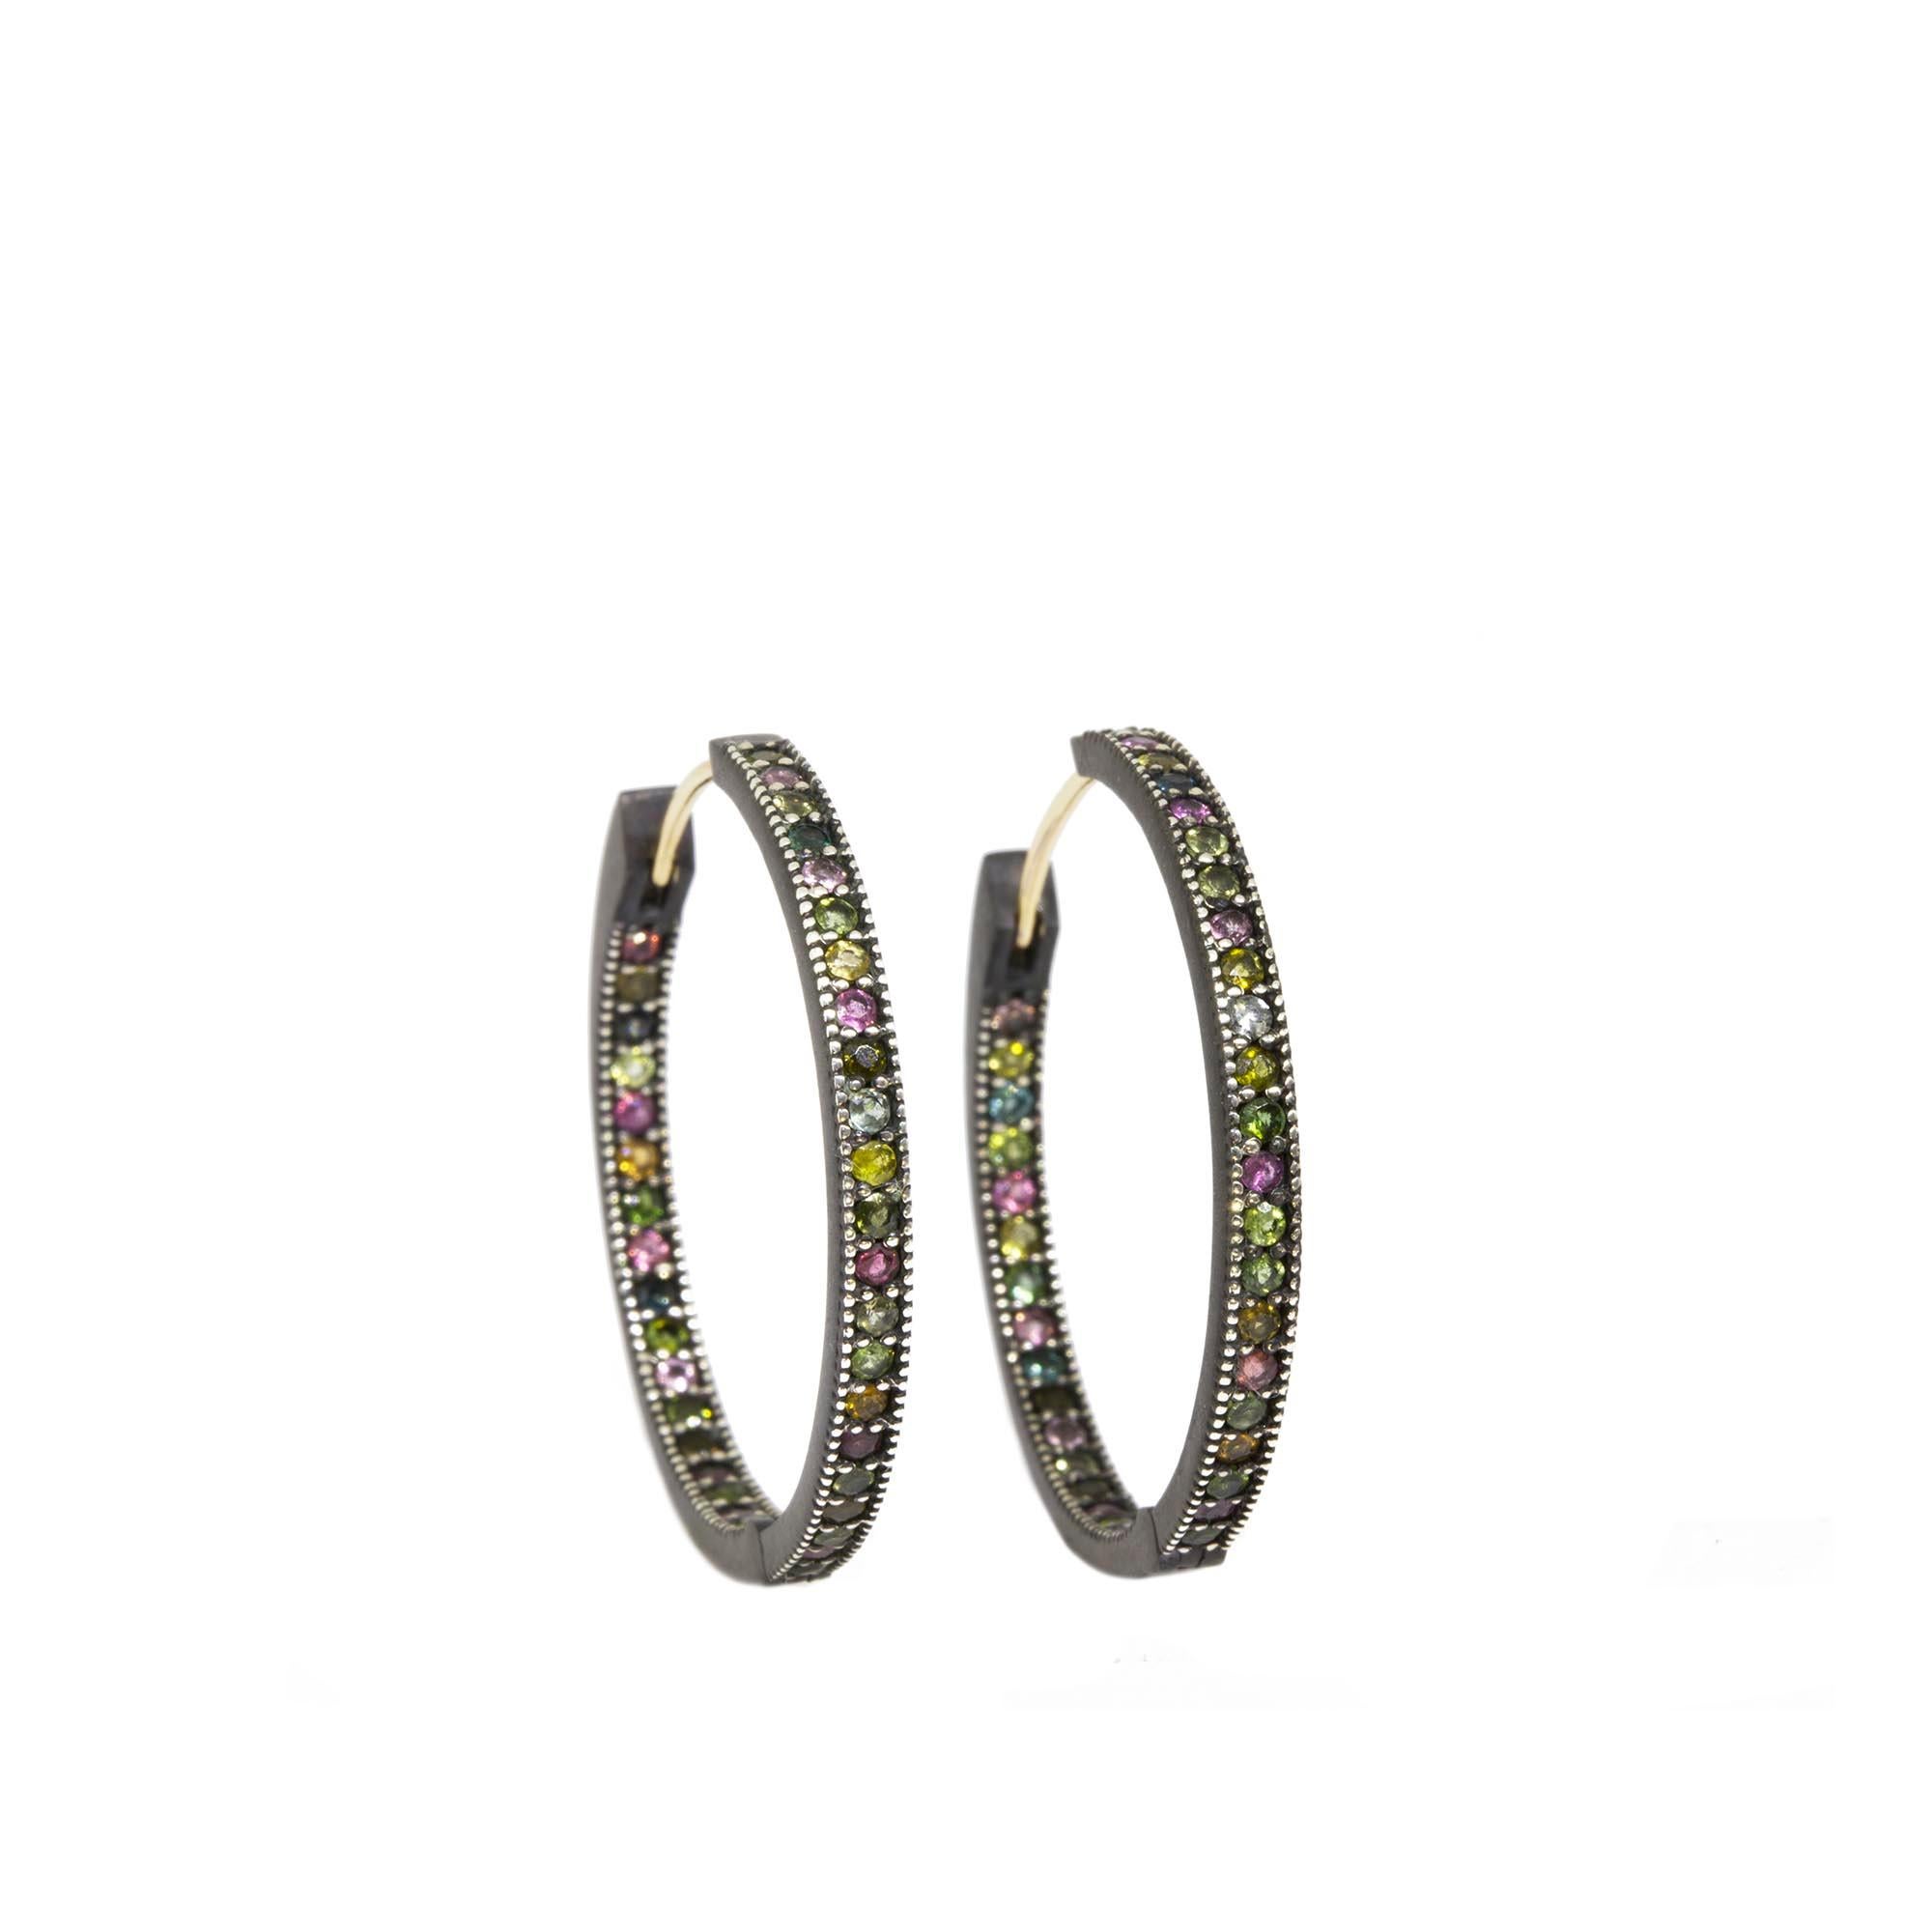 Contemporary Ariana Moonstone Charms and Intricate Tourmaline Oxidized Hoop Earrings For Sale